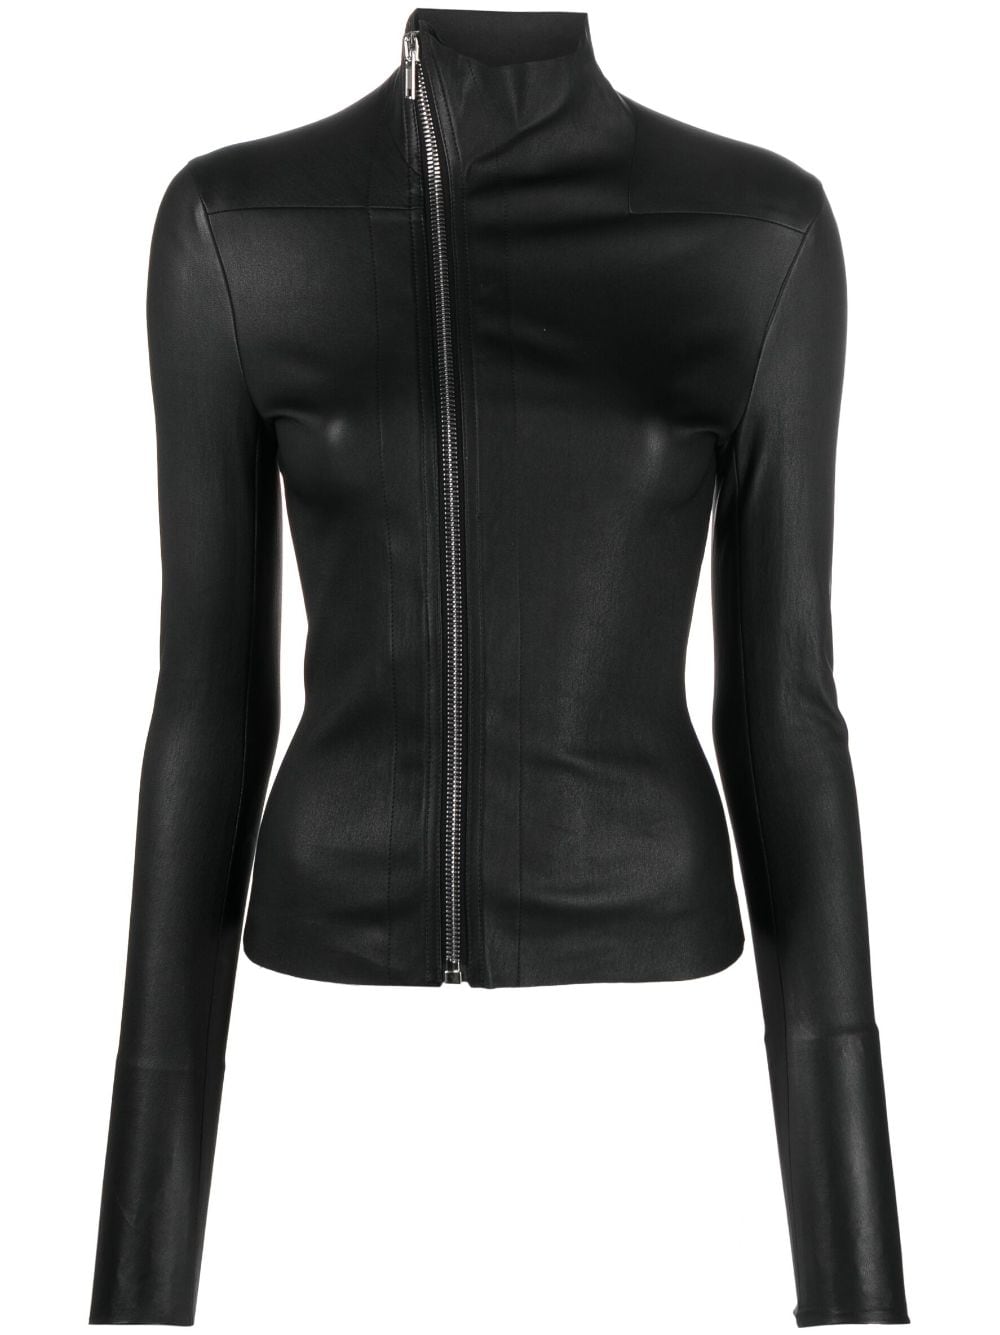 Image 1 of Rick Owens off-centre zip-up leather jacket